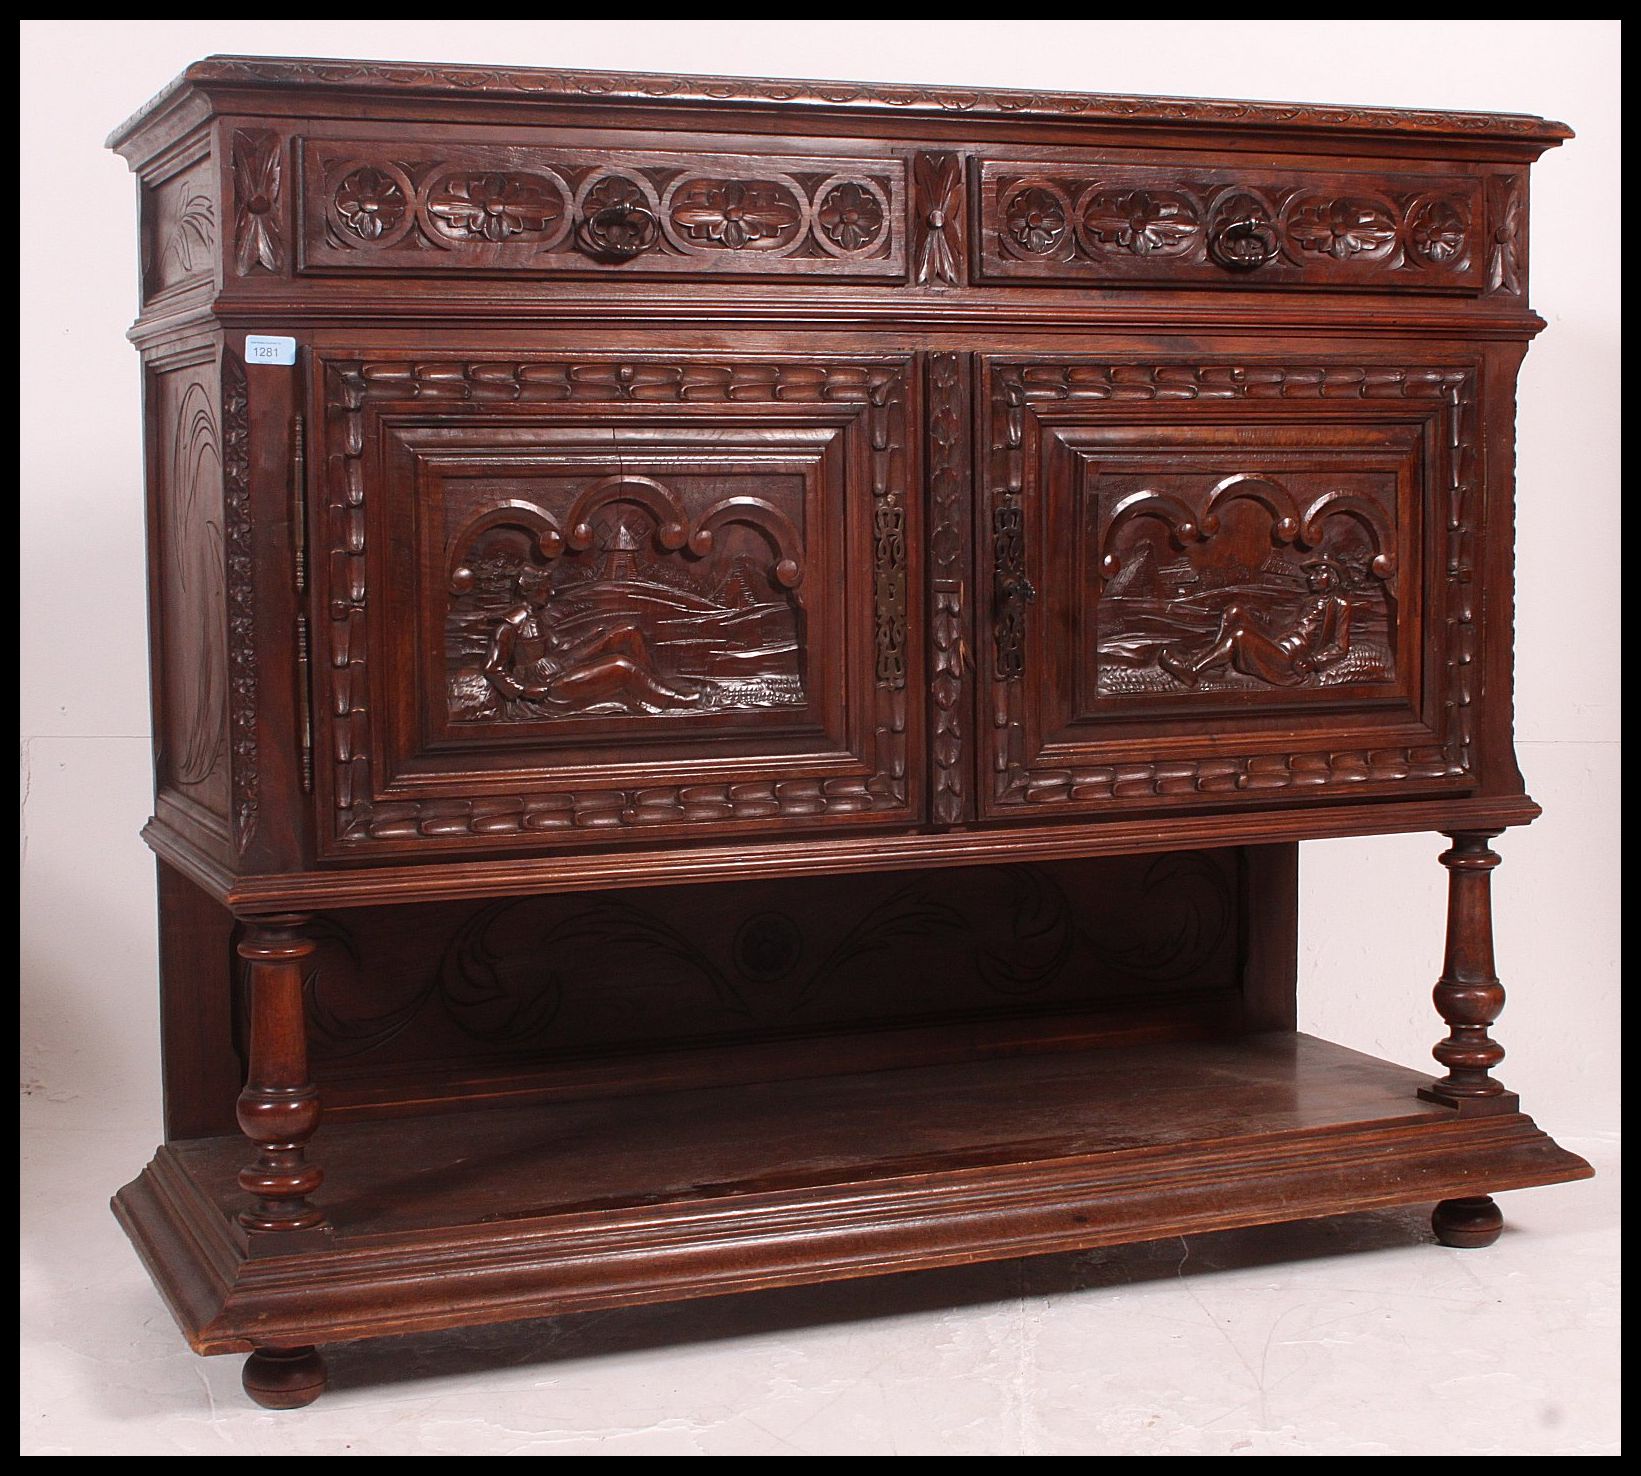 A 19th century Jacobean carved oak green man revival marble top sideboard / buffet.